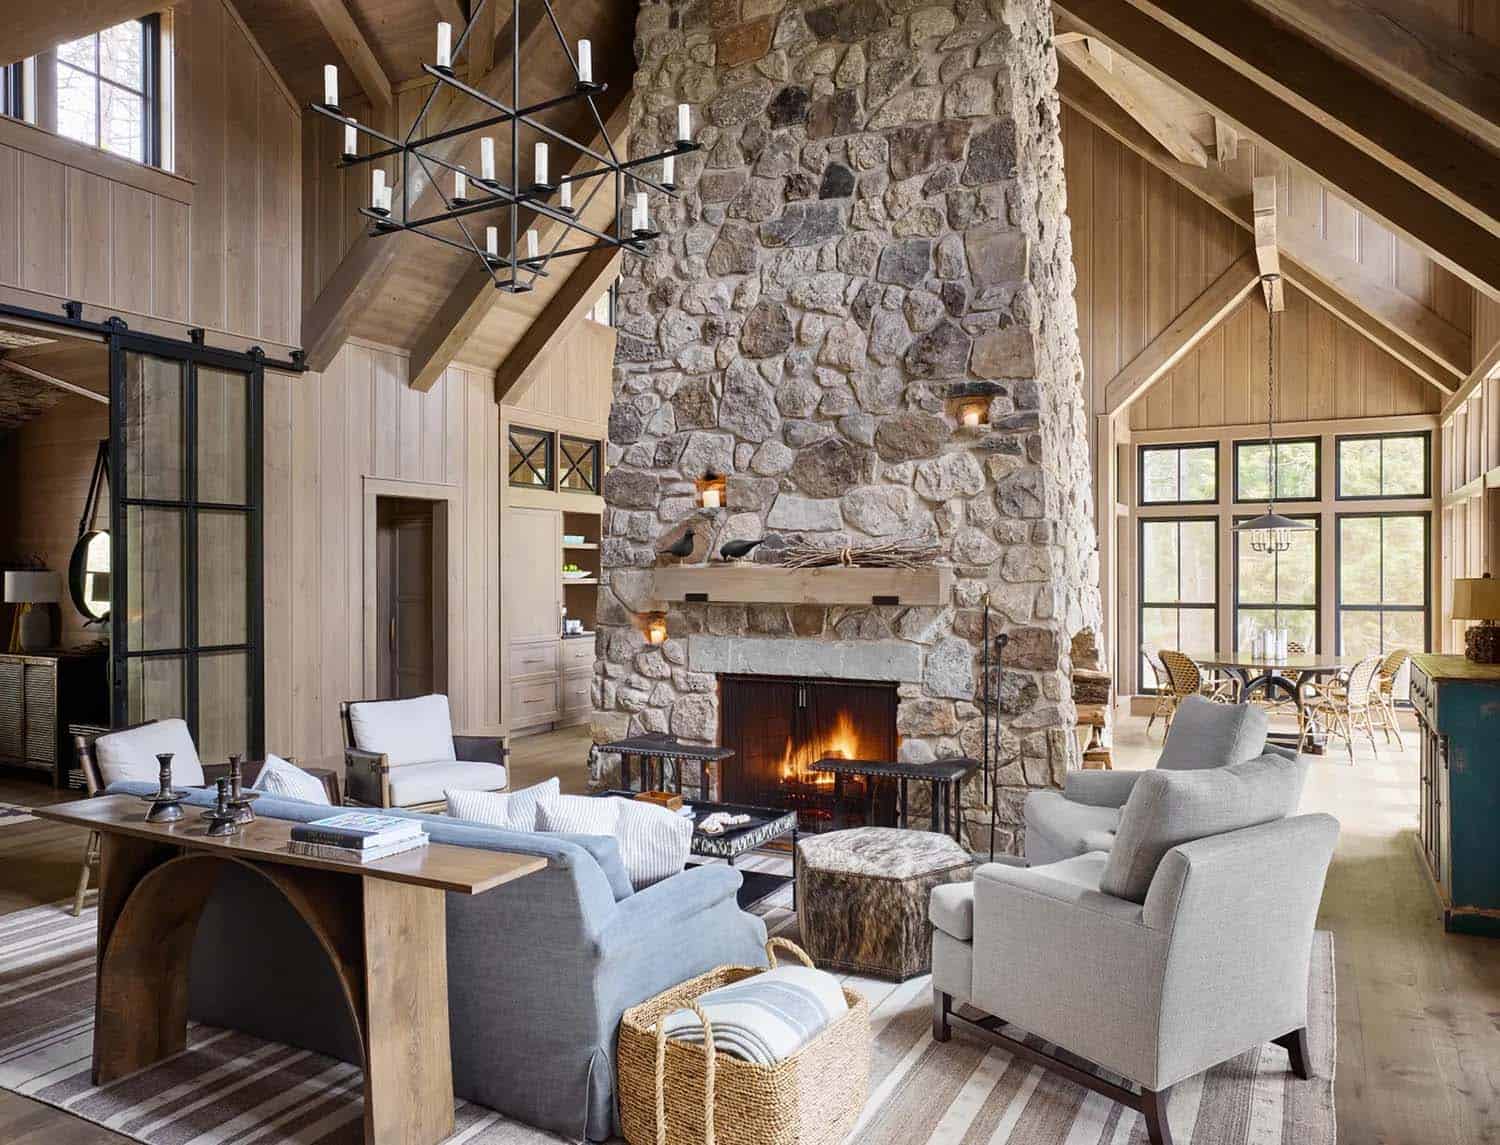 Step into this rustic North Woods Wisconsin cabin with charming details